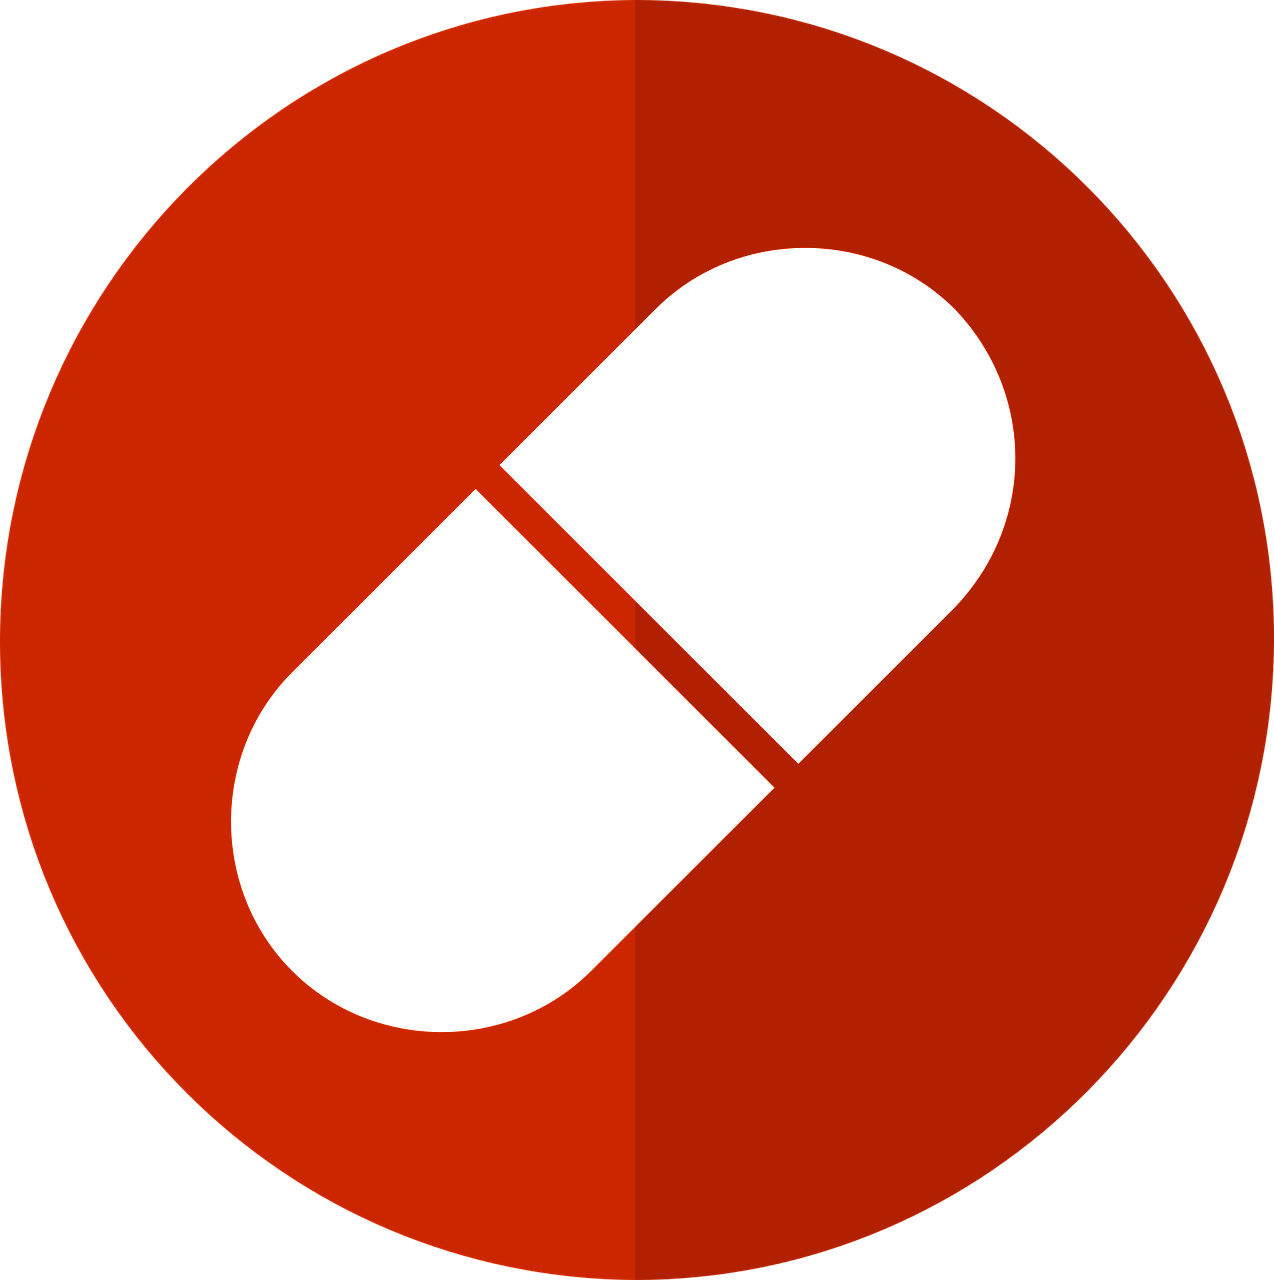 drug-icon-2316244_1280.png